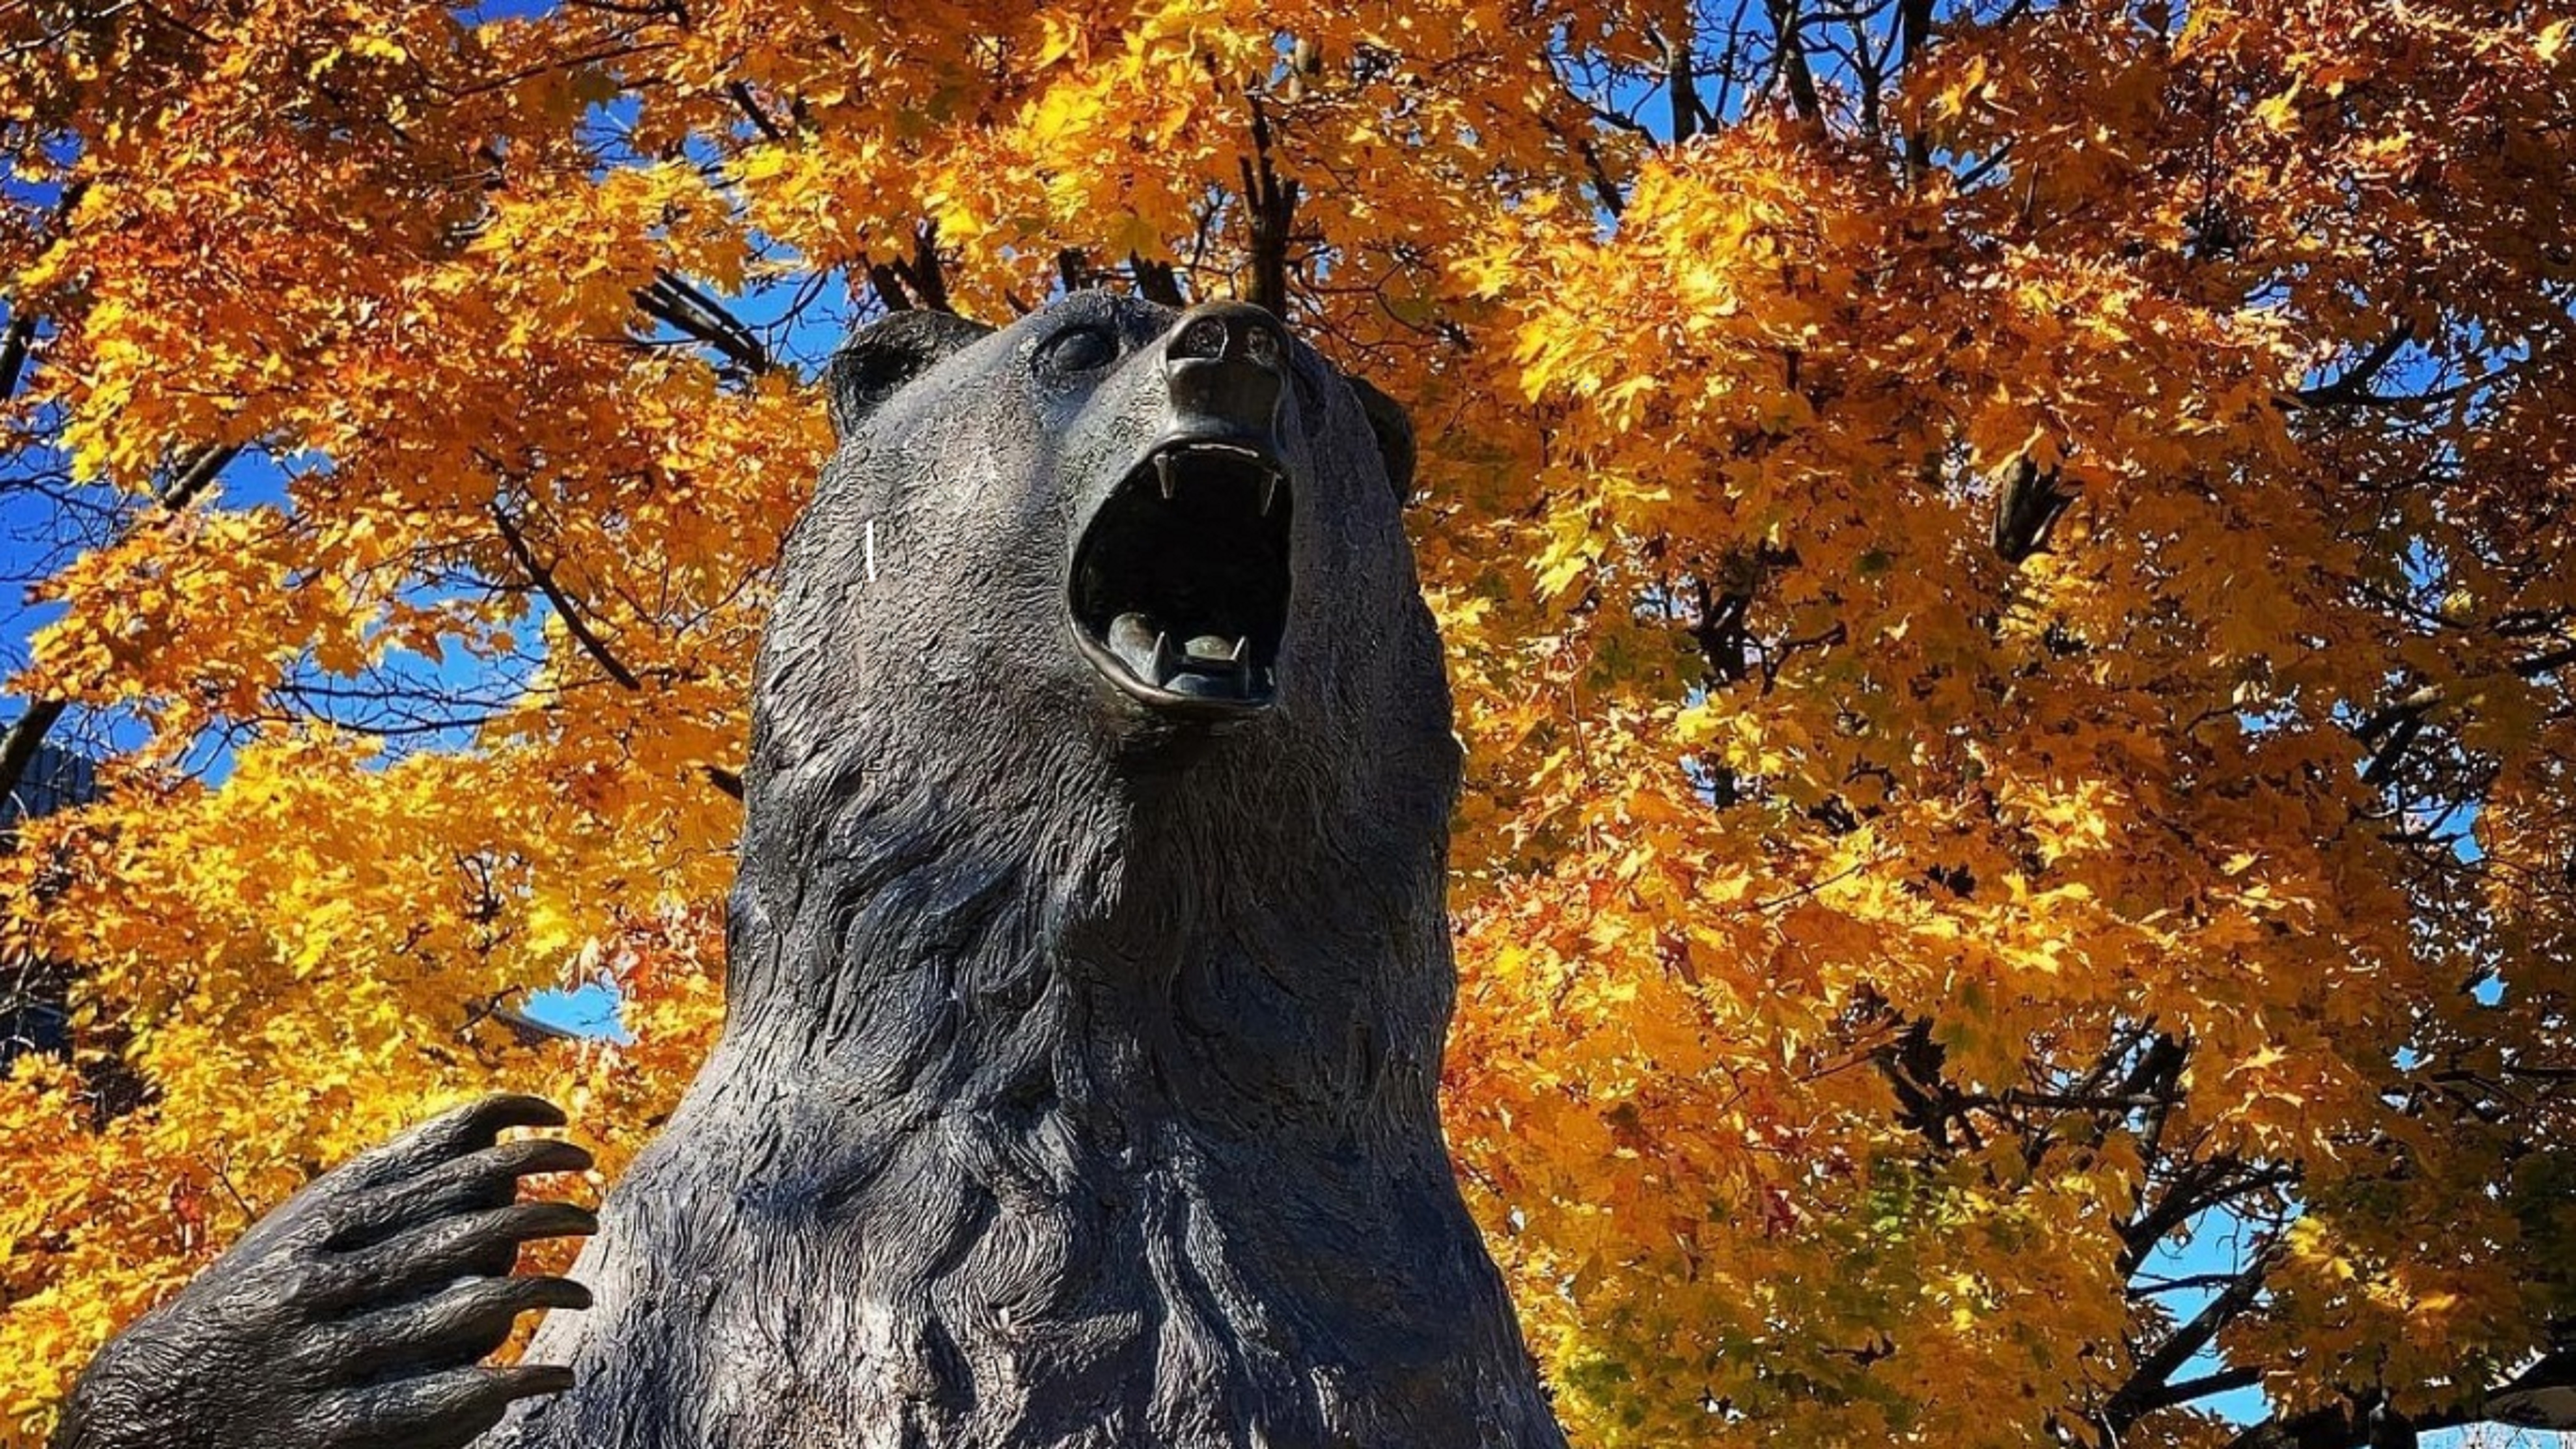 Kutztown Bear Statue in front of Autumn colored leaves